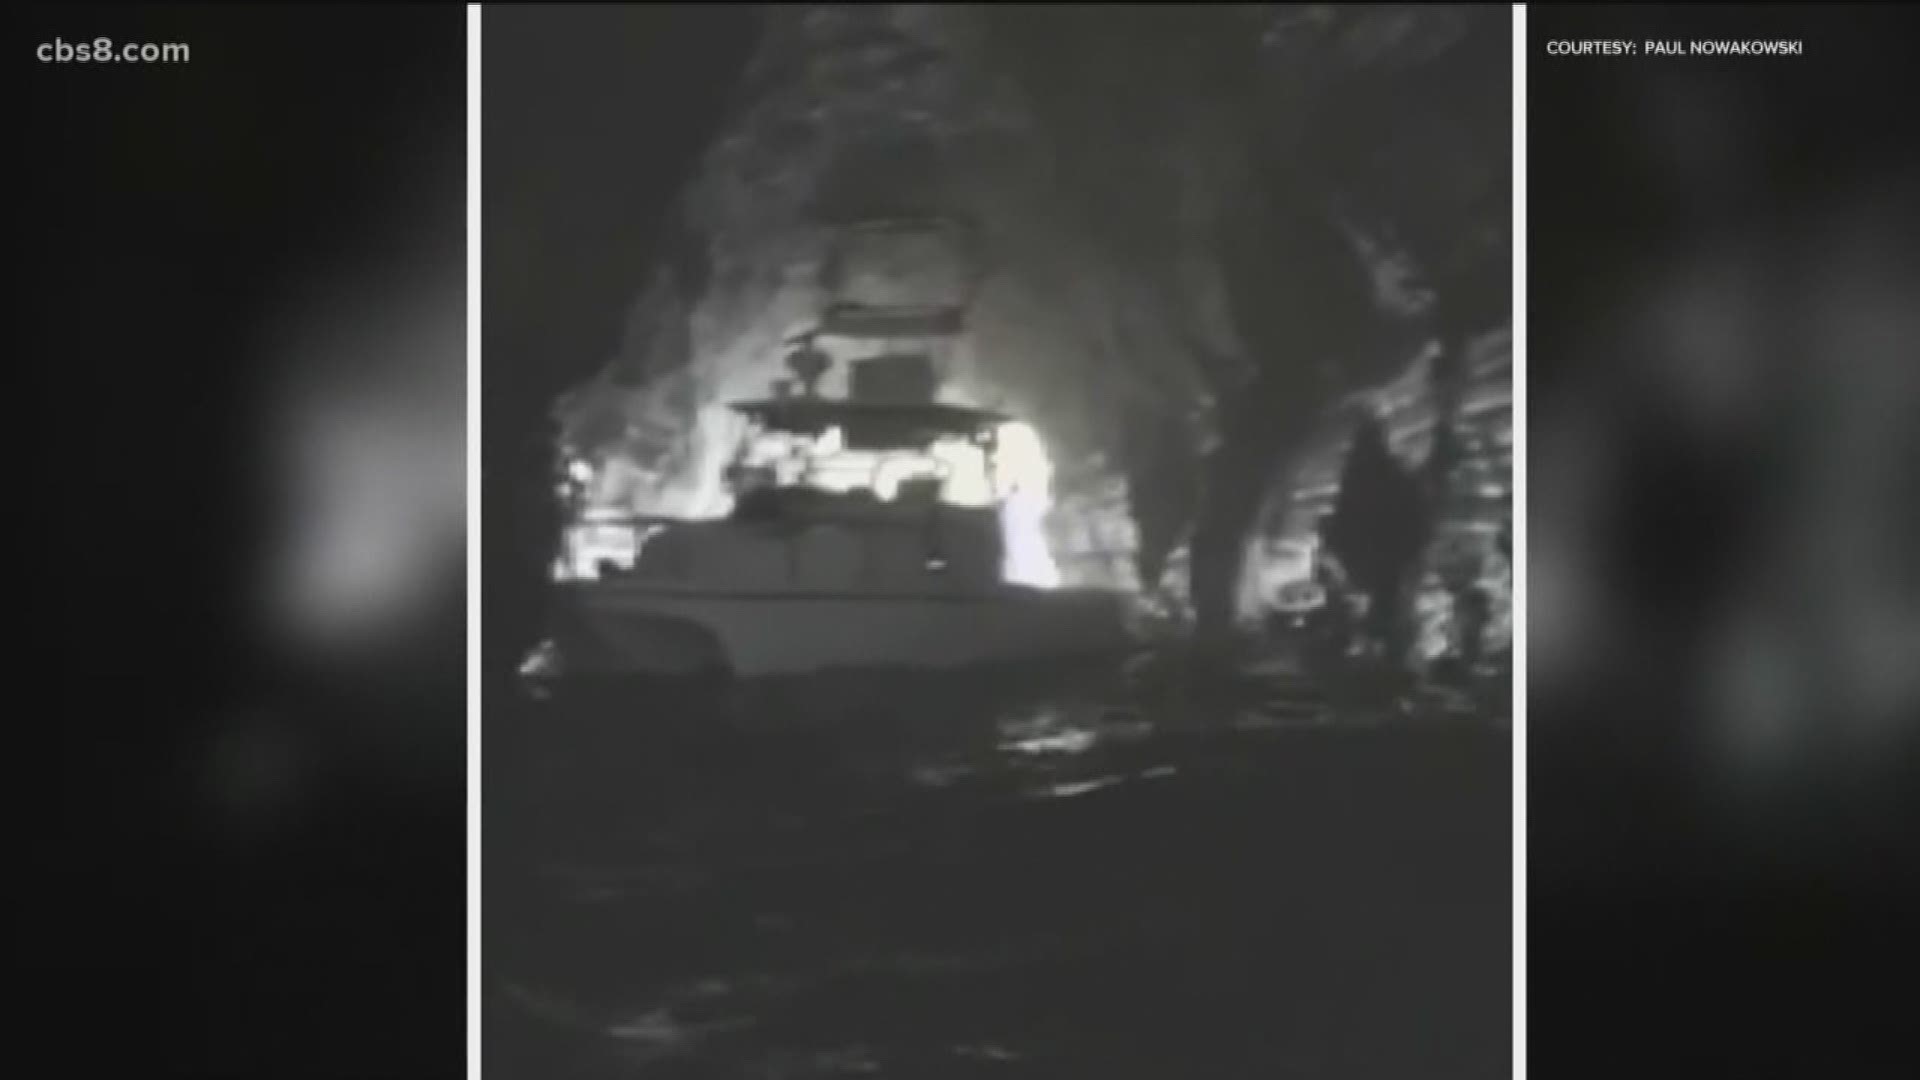 Lifeguards rescued two men after they fell asleep on a boat and awoke to find themselves inside a cave.